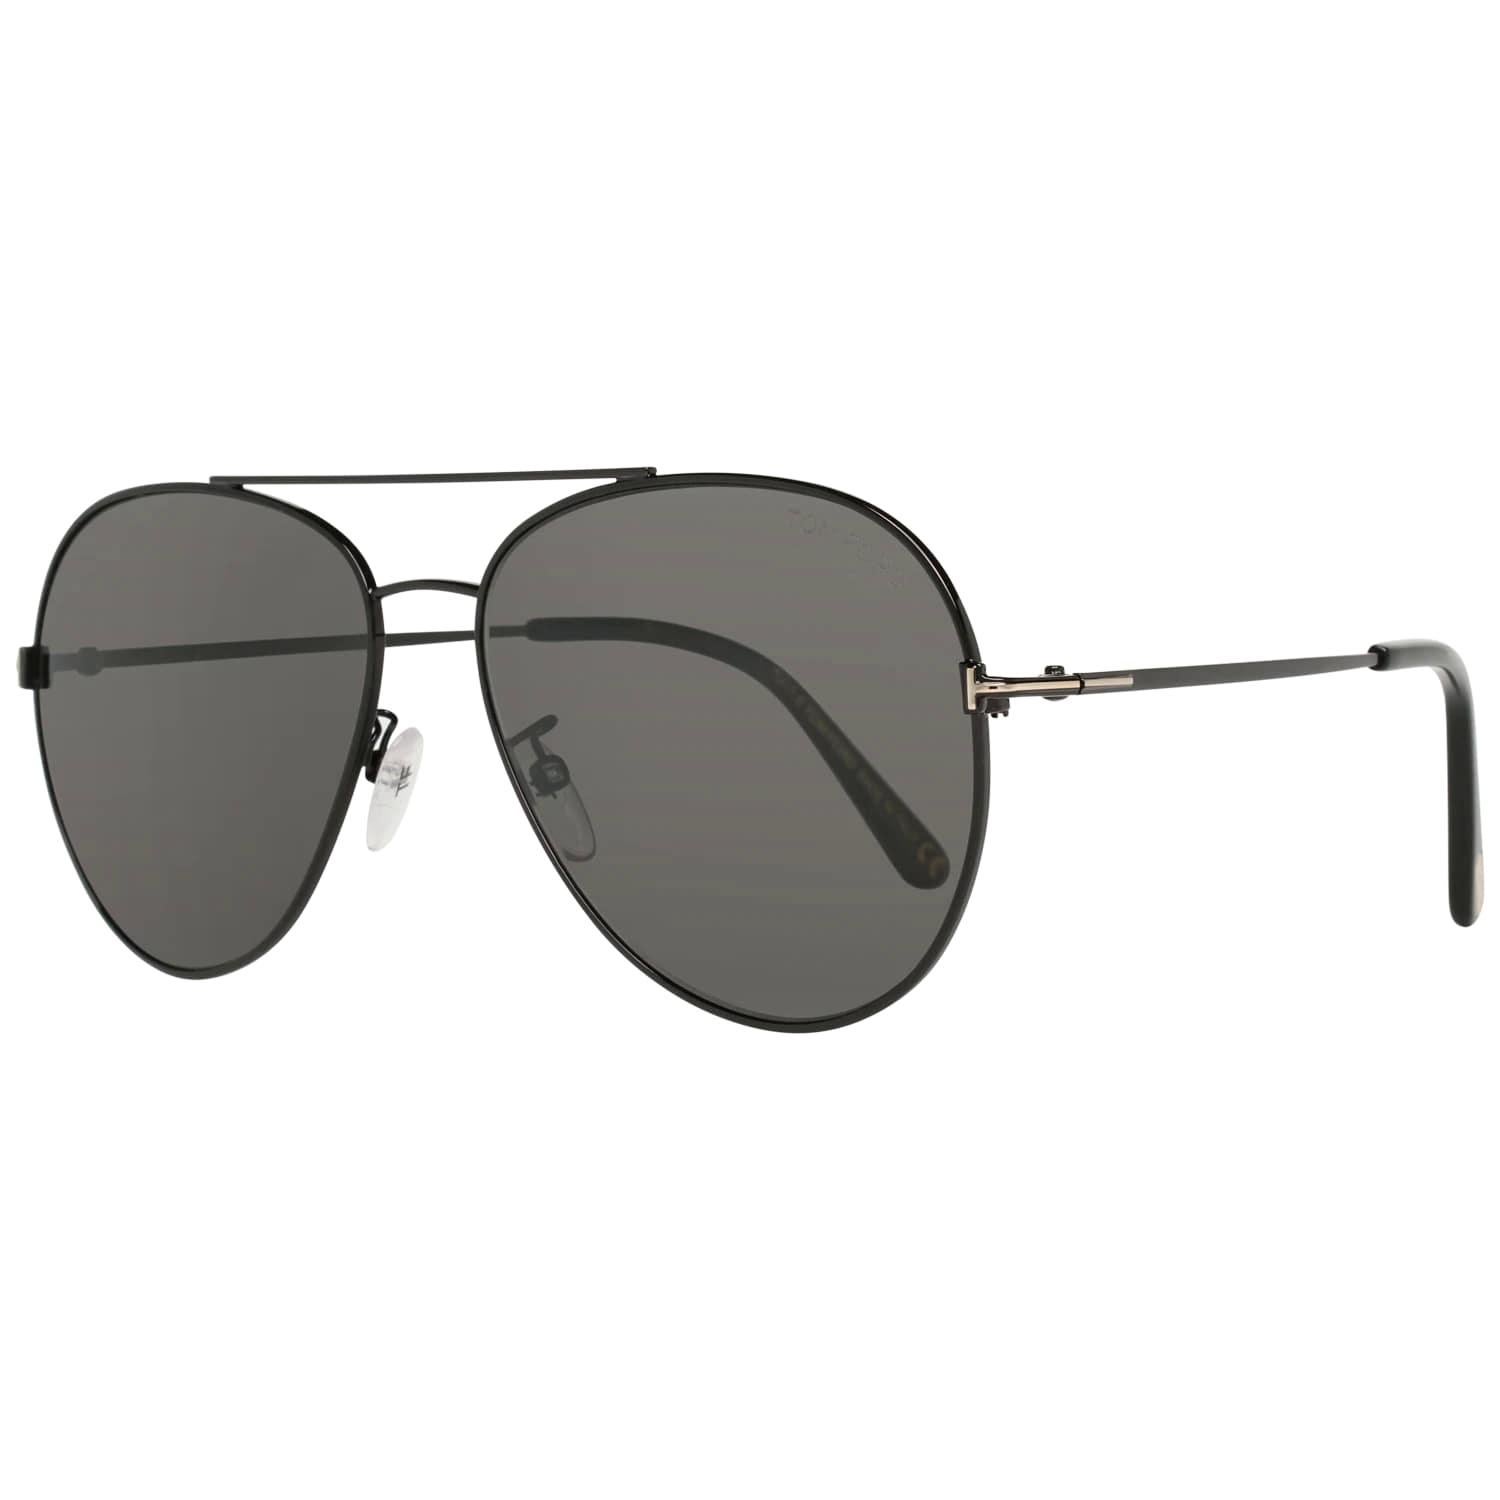 Details

MATERIAL: Metal

COLOR: Black

MODEL: FT0636-K 6201D

GENDER: Adult Unisex

COUNTRY OF MANUFACTURE: Italy

TYPE: Sunglasses

ORIGINAL CASE?: Yes

STYLE: Aviator

OCCASION: Casual

FEATURES: Lightweight

LENS COLOR: Grey

LENS TECHNOLOGY: